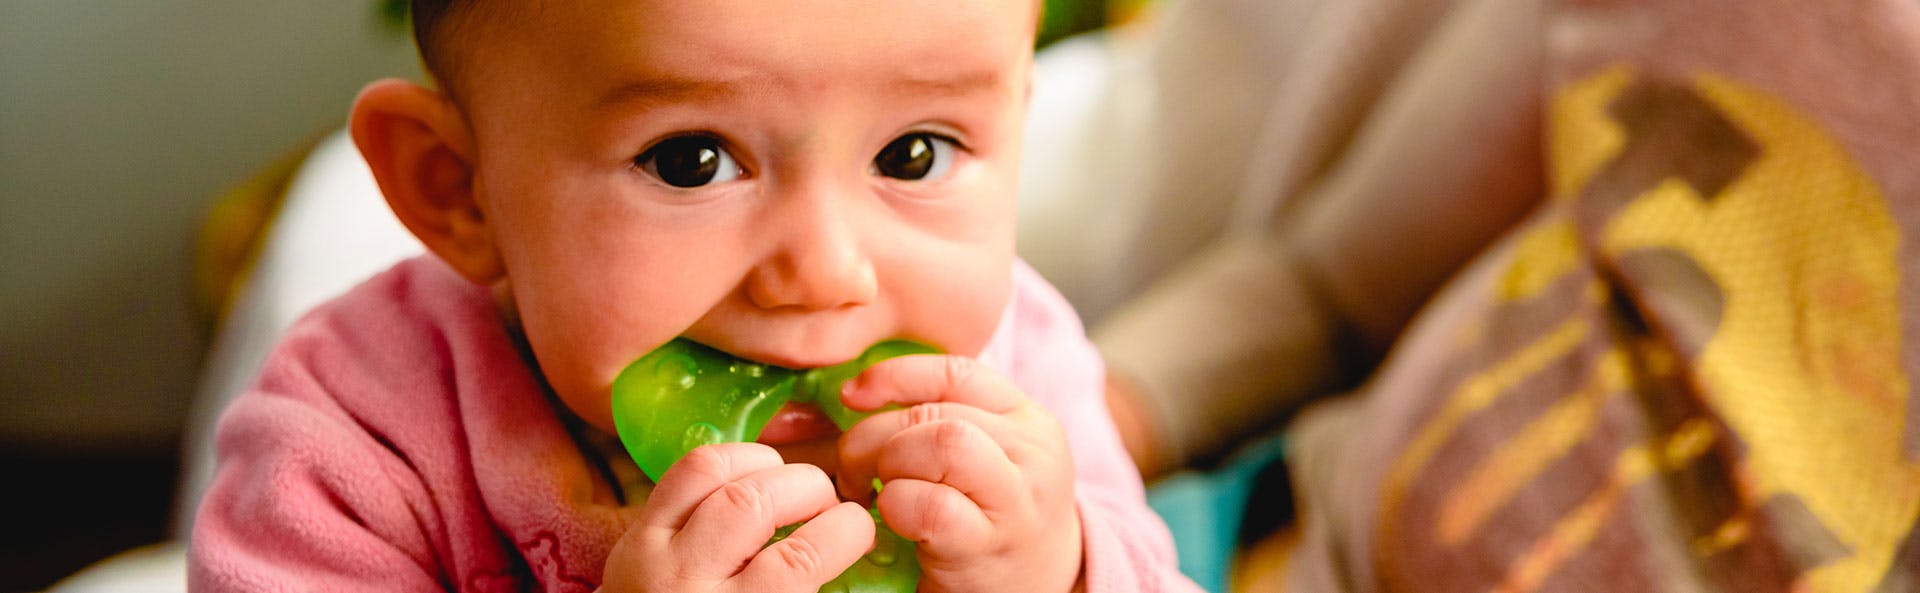 A baby using a teether